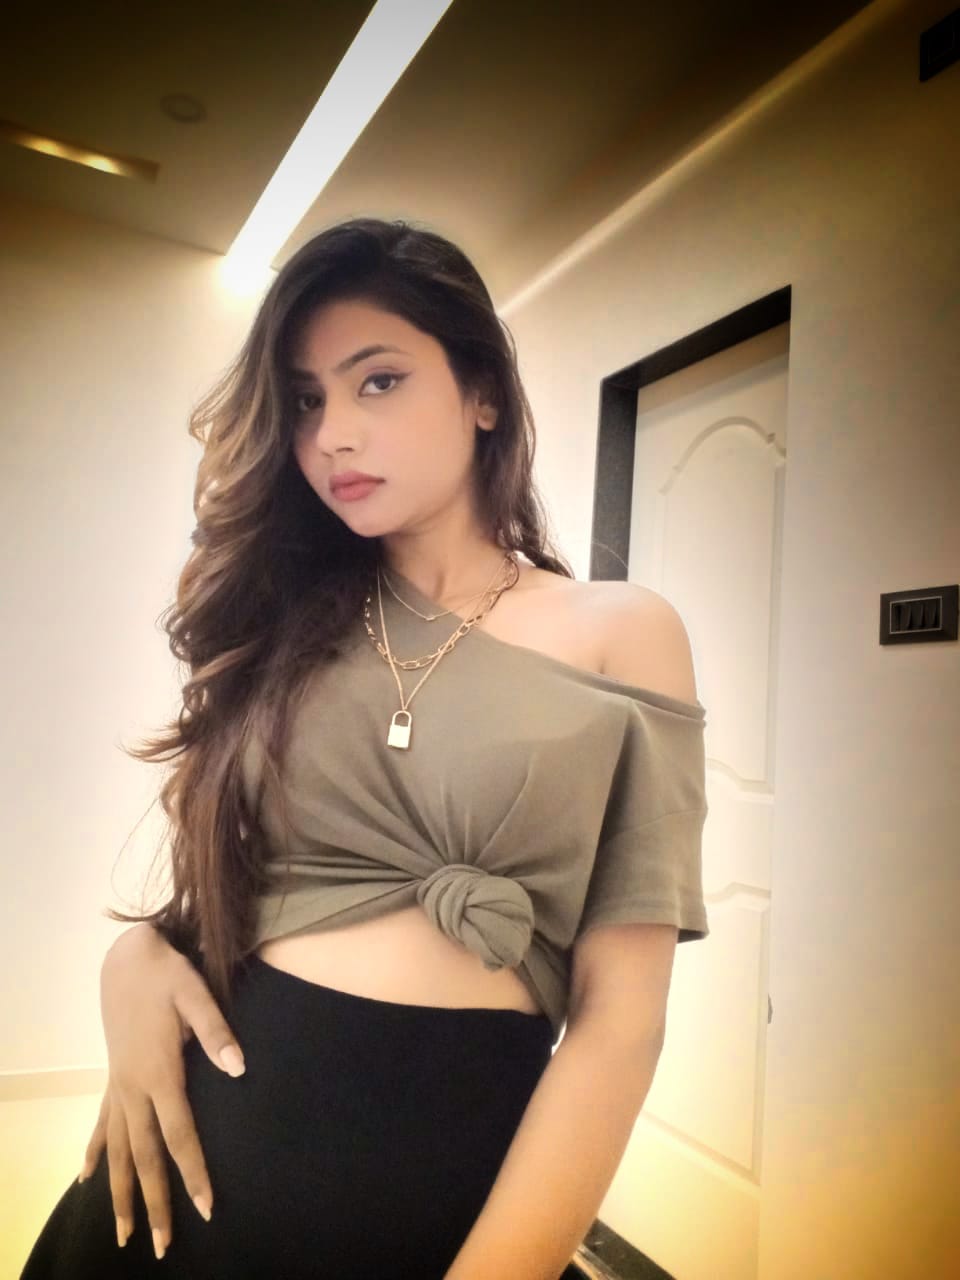 Want to have sex with a busty girl in Faridabad